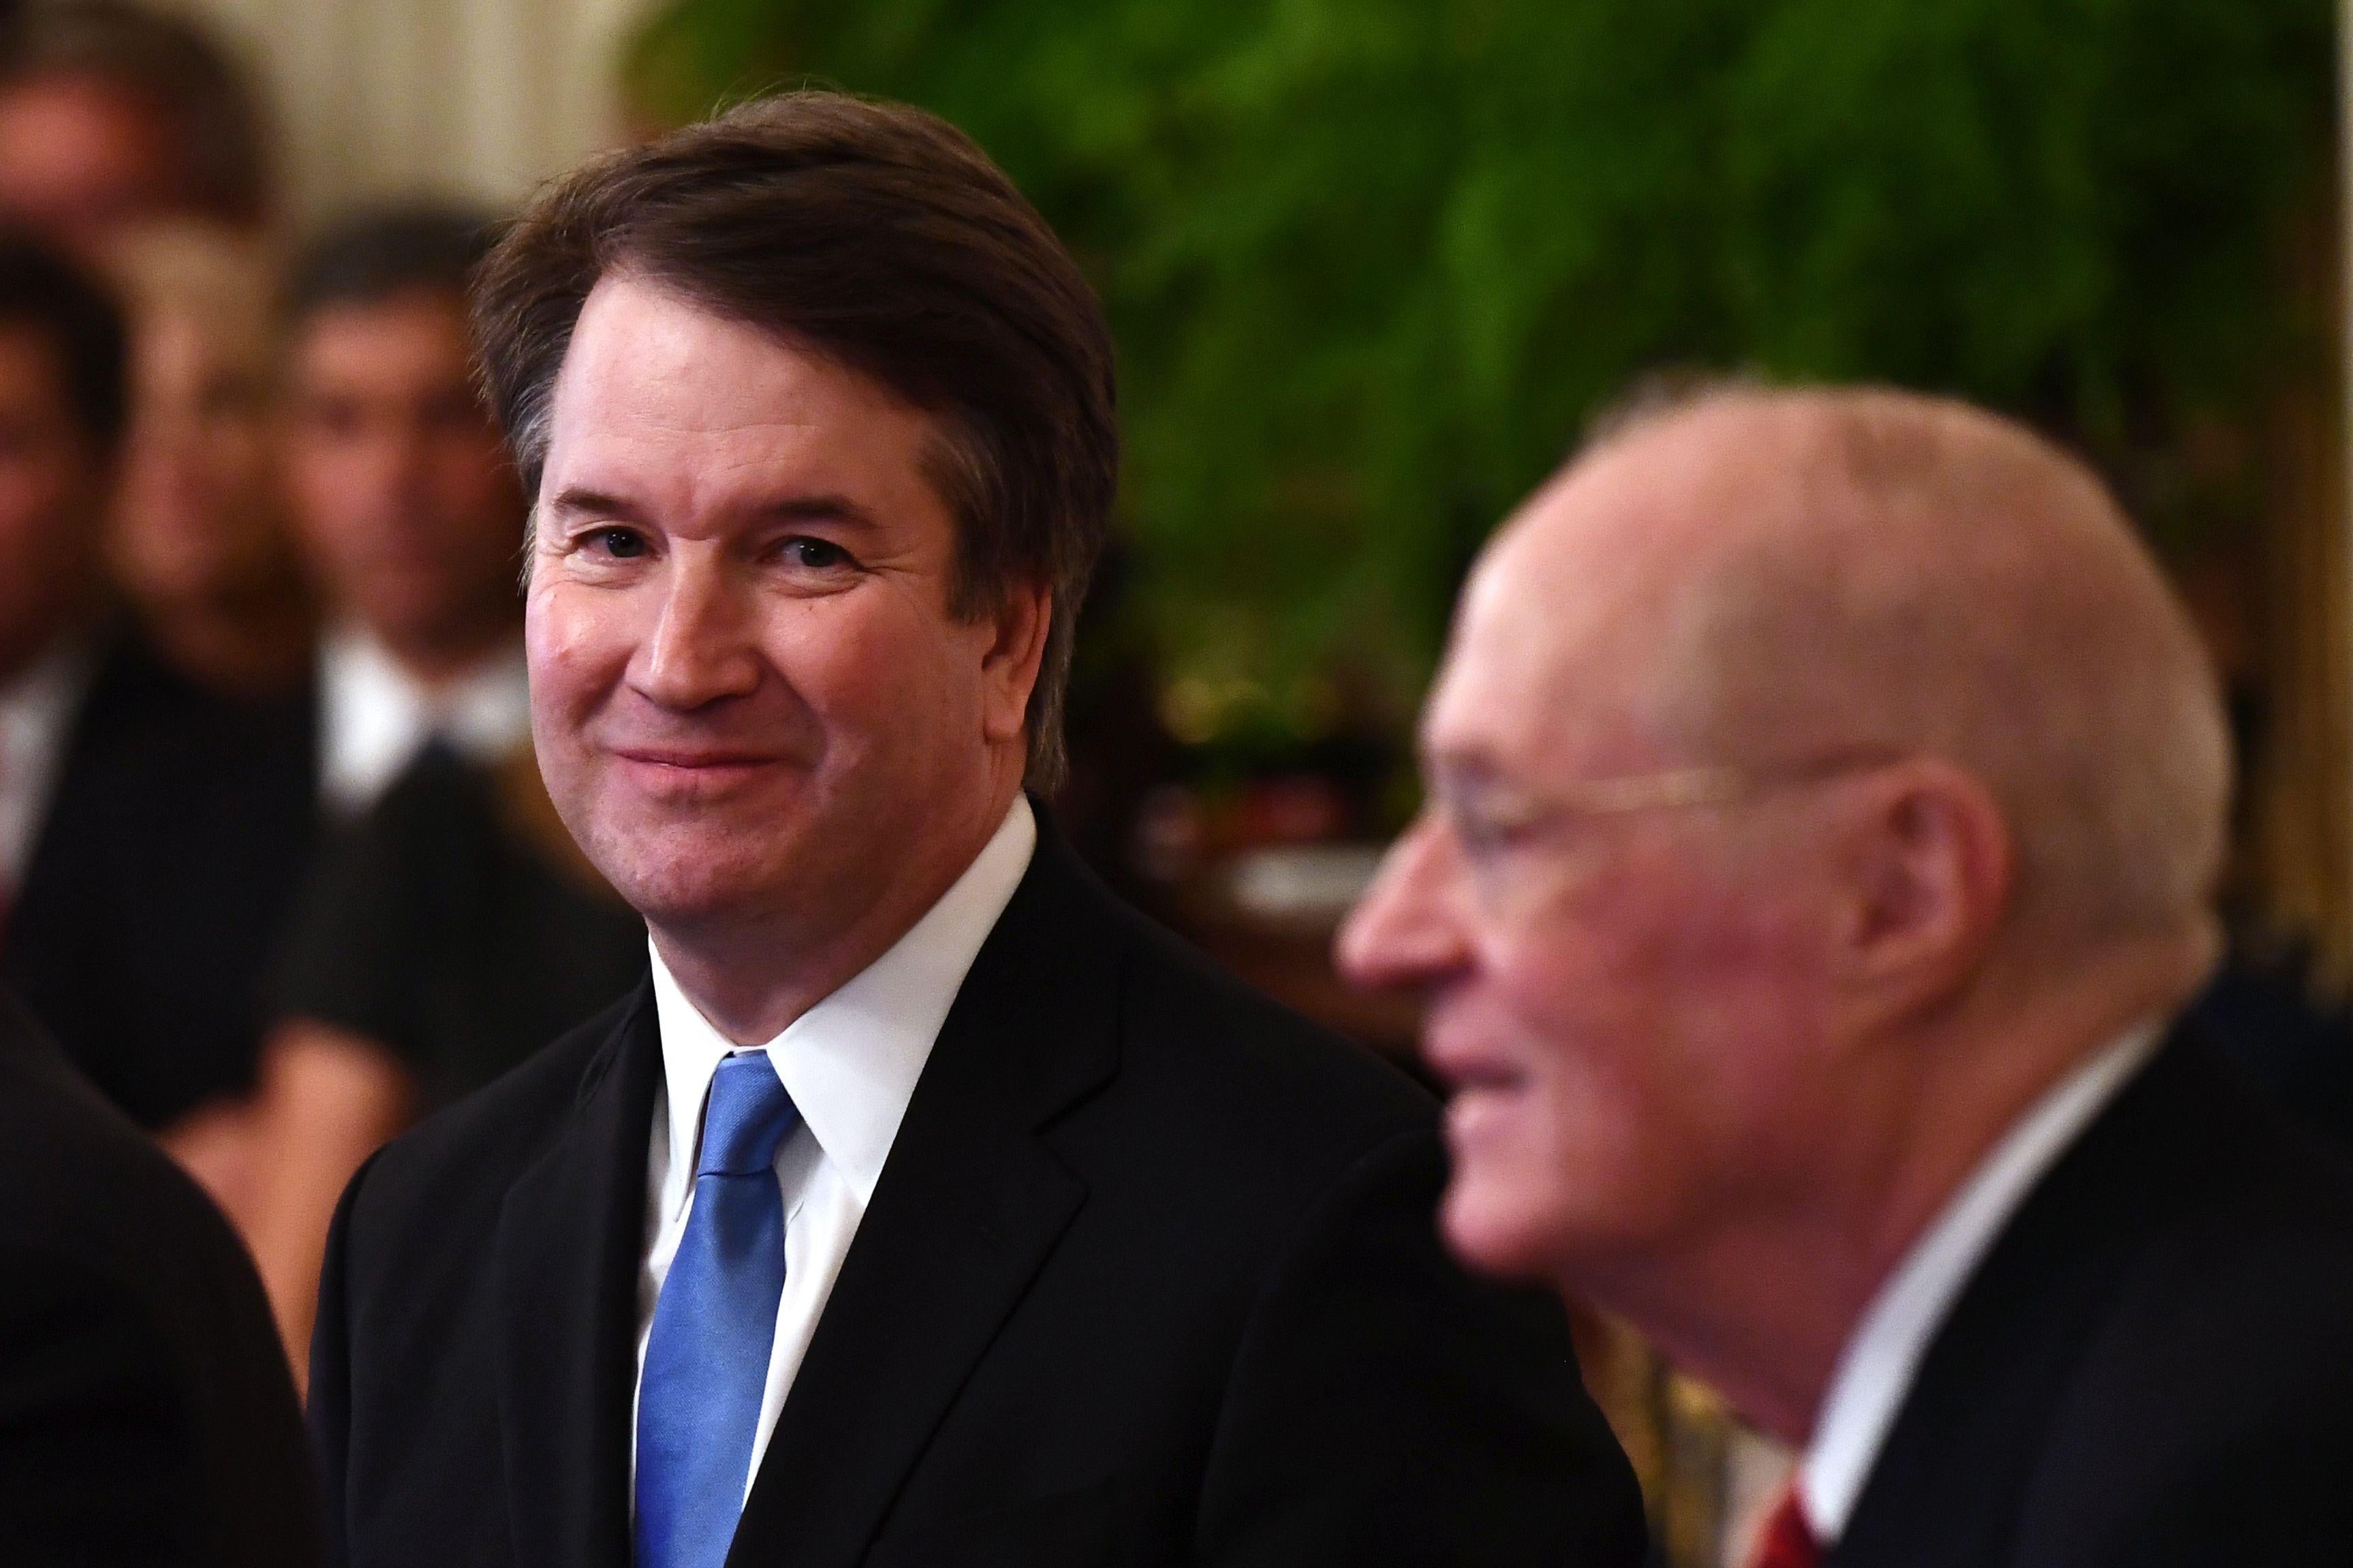 Kavanaugh with a wide grin as Kennedy is a bit blurry.